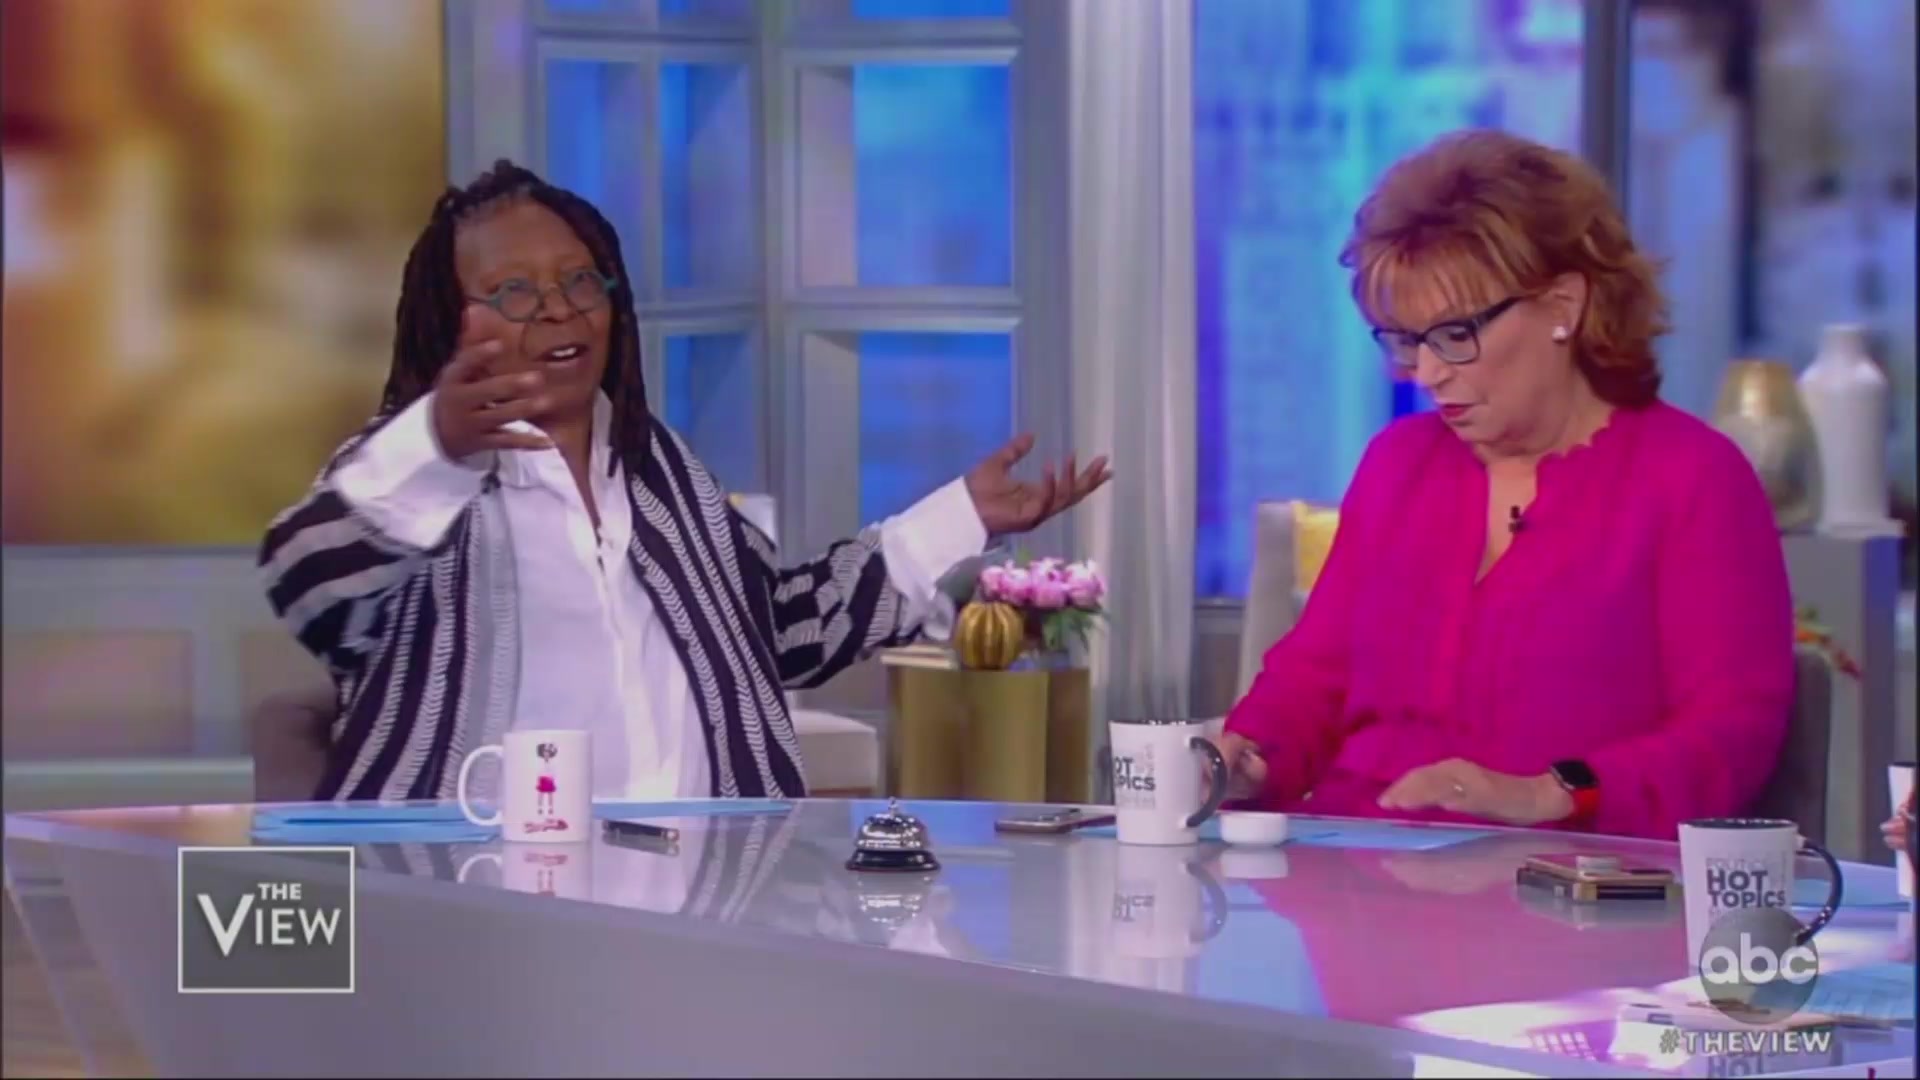 The View’s Whoopi Goldberg, Joy Behar Bleeped Out While Blasting Trump